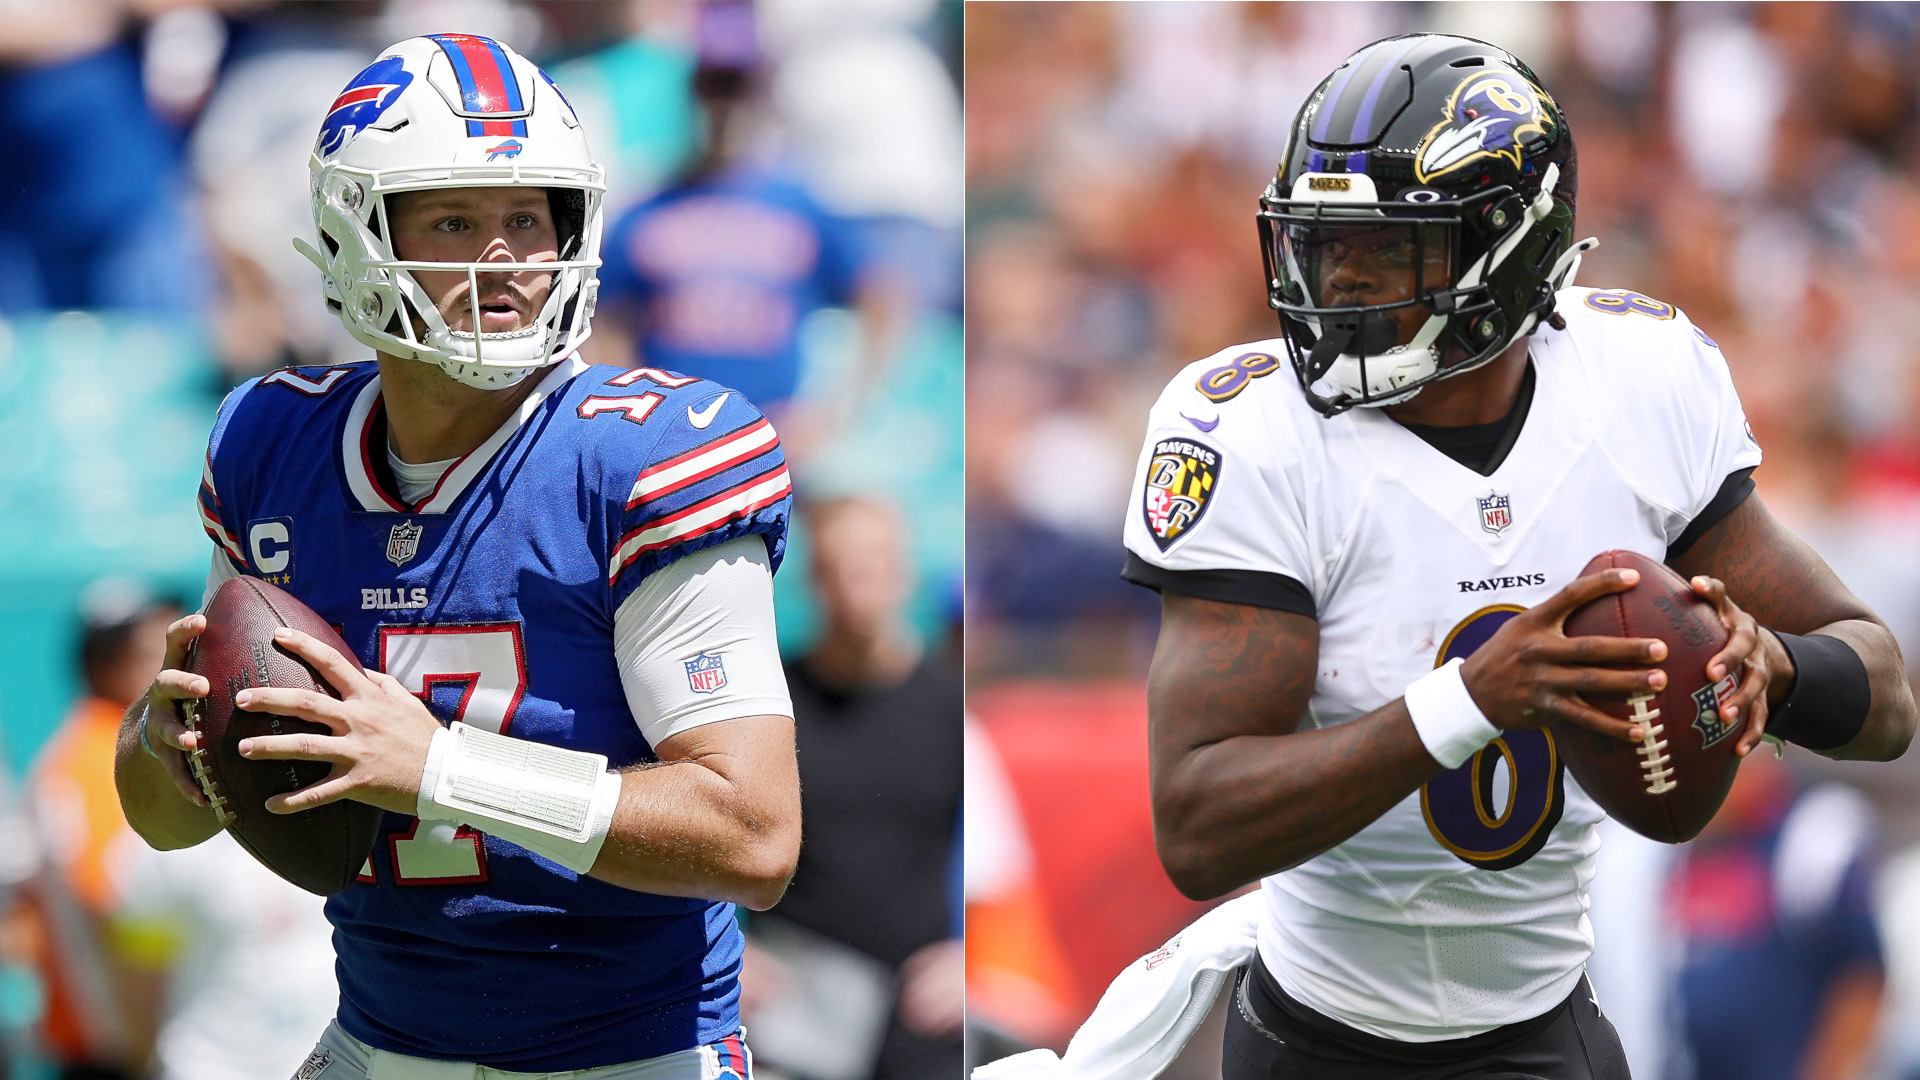 Bills vs Ravens live stream: how to watch NFL online and on TV from  anywhere today